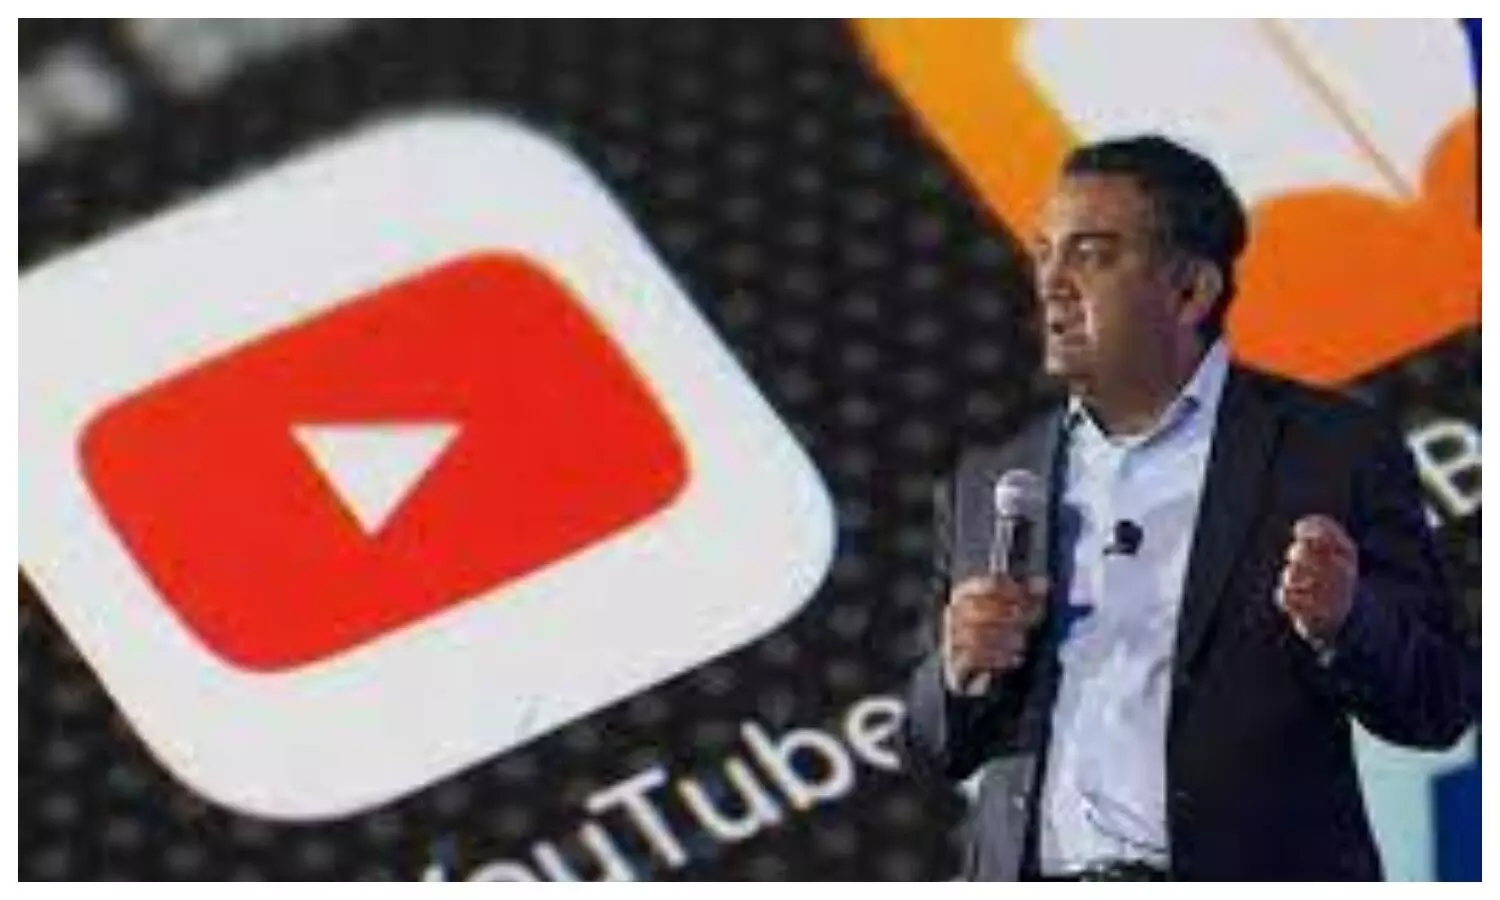 YouTube CEO Neil Mohan